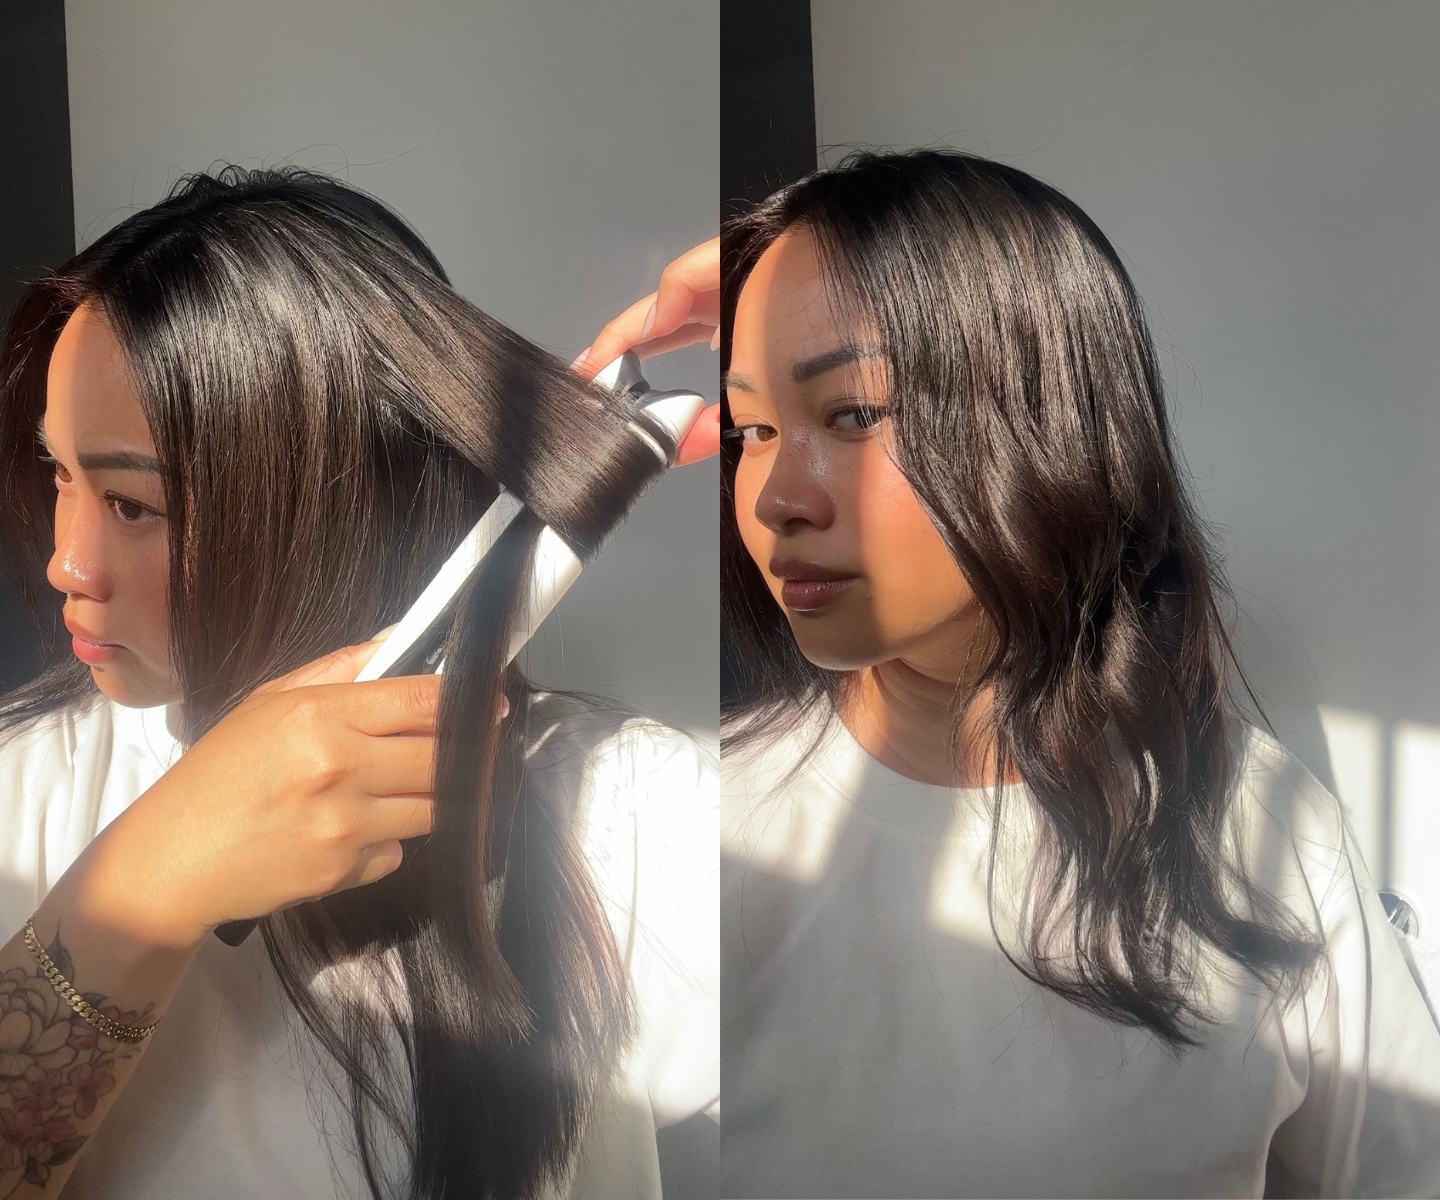 ghd Chronos Styler in-use Chloe in-article